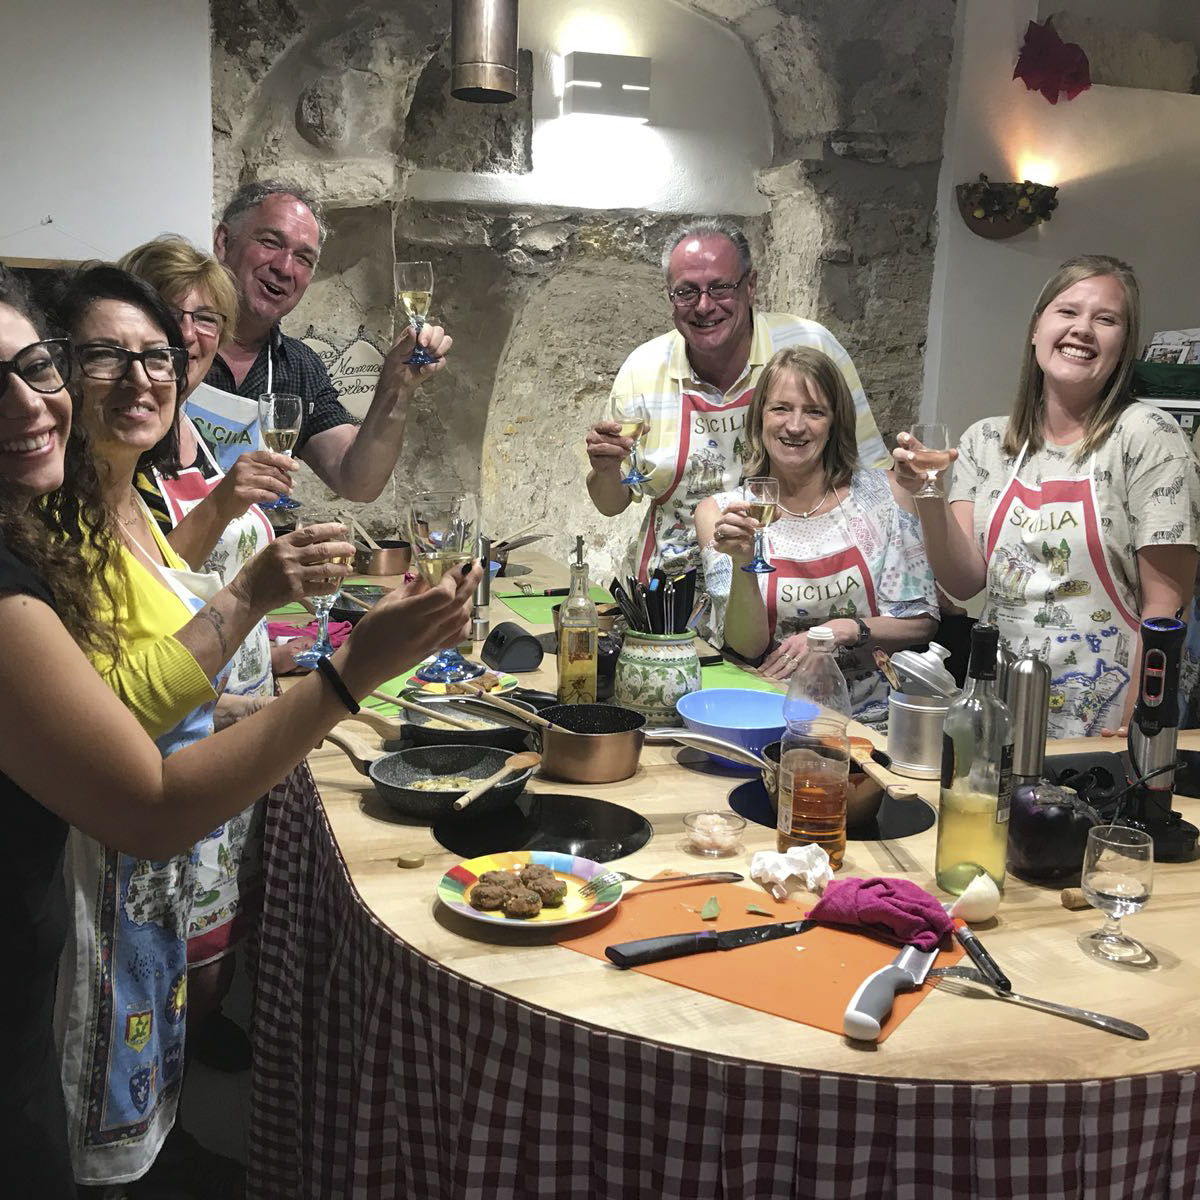 Afternoon pasta cooking class with a Mamma in Palermo